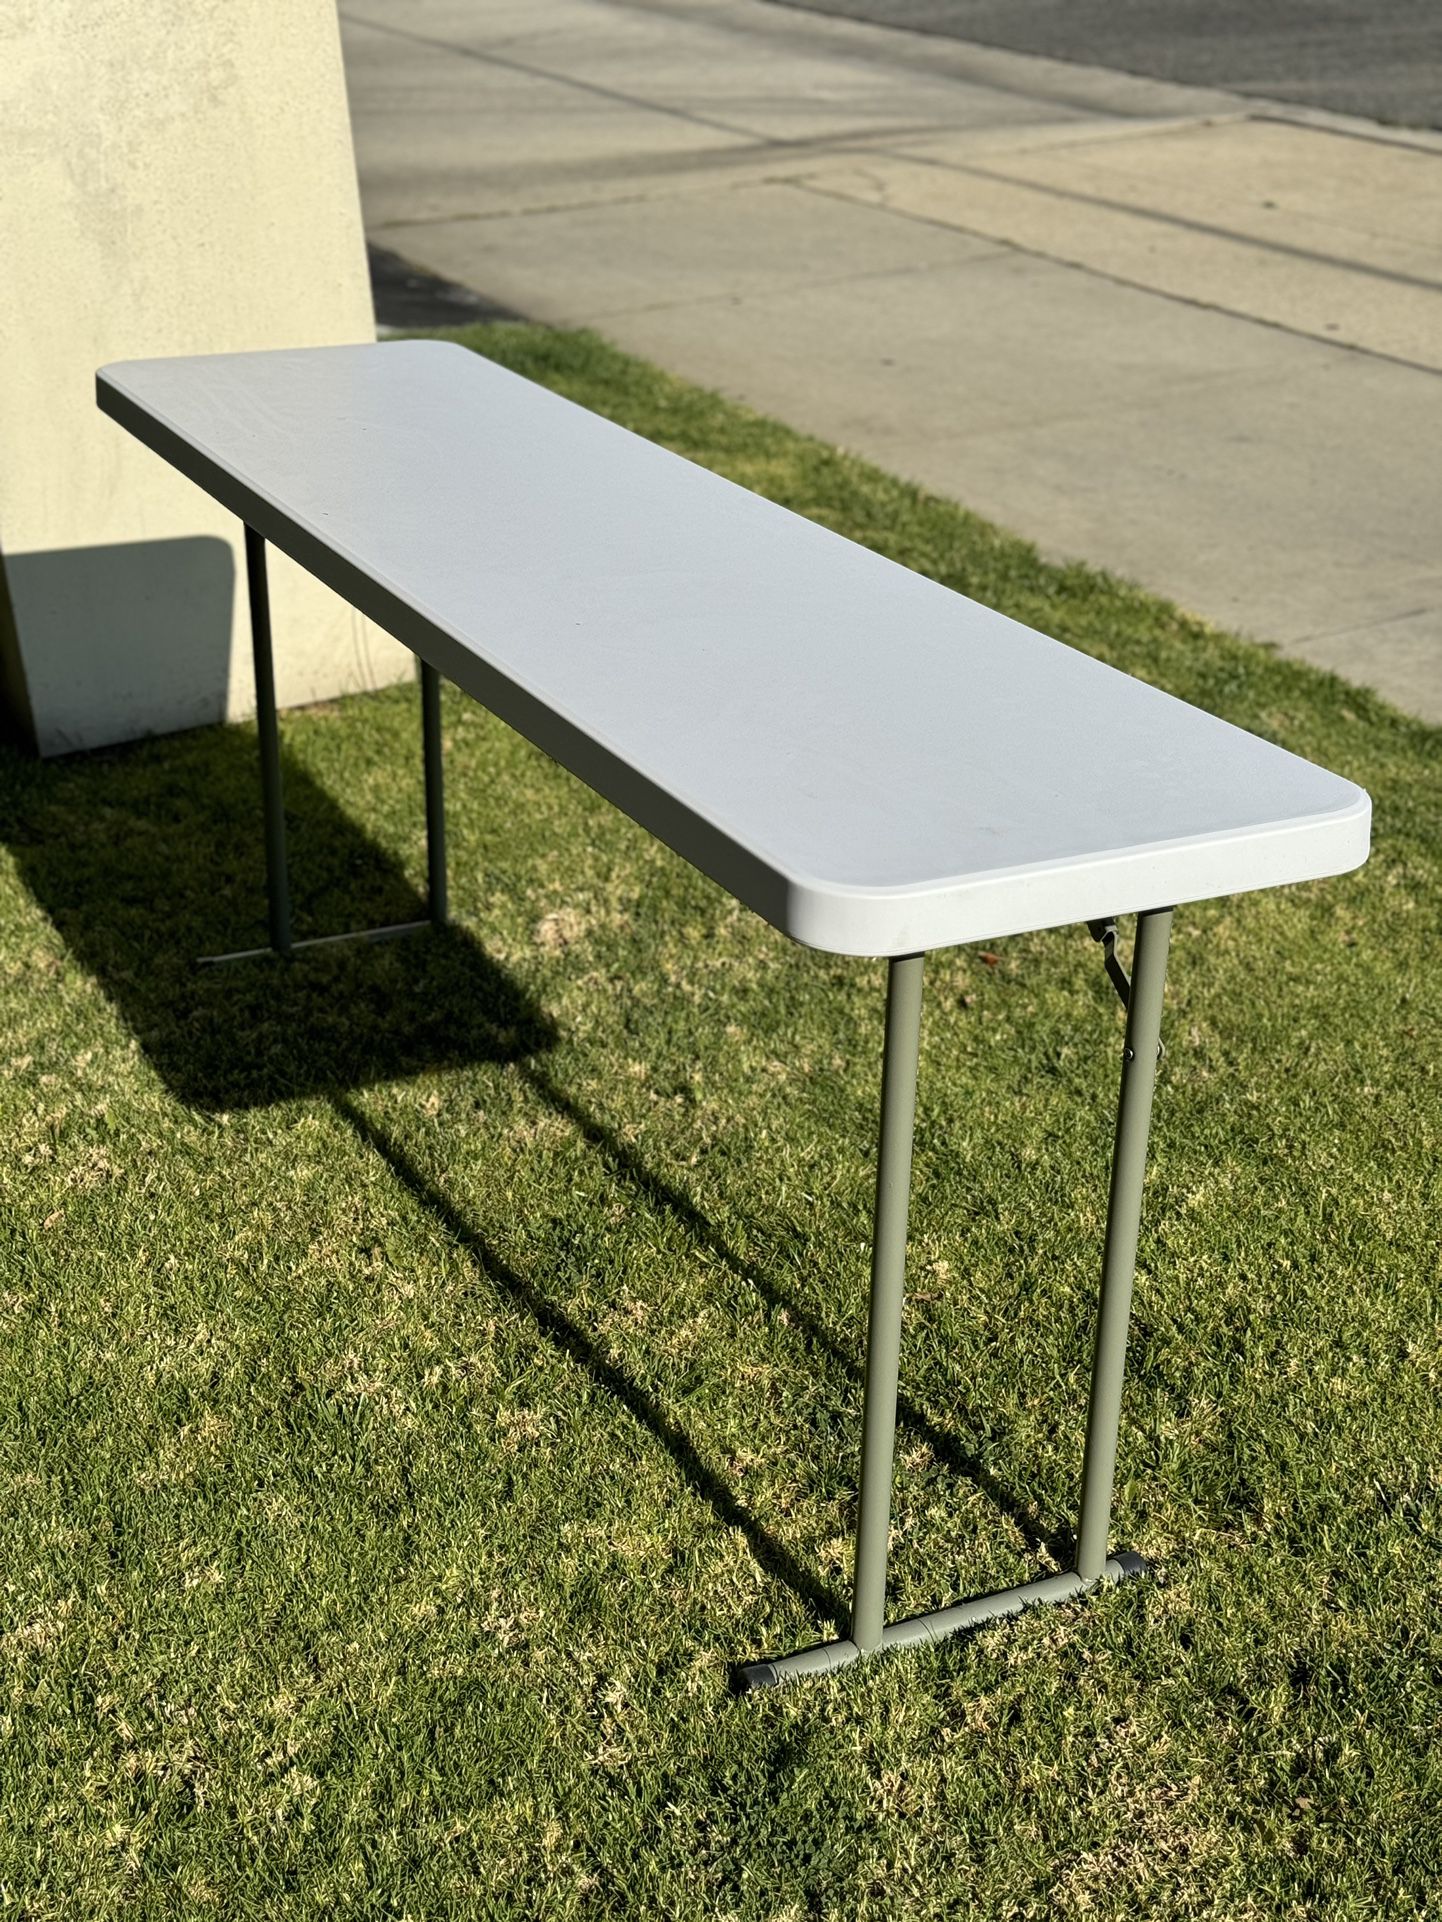 6-Foot - 72" long White Plastic Folding Seminar Training Table Portable 18" Wide narrow, 29" High, events indoor outdoor lightweight 